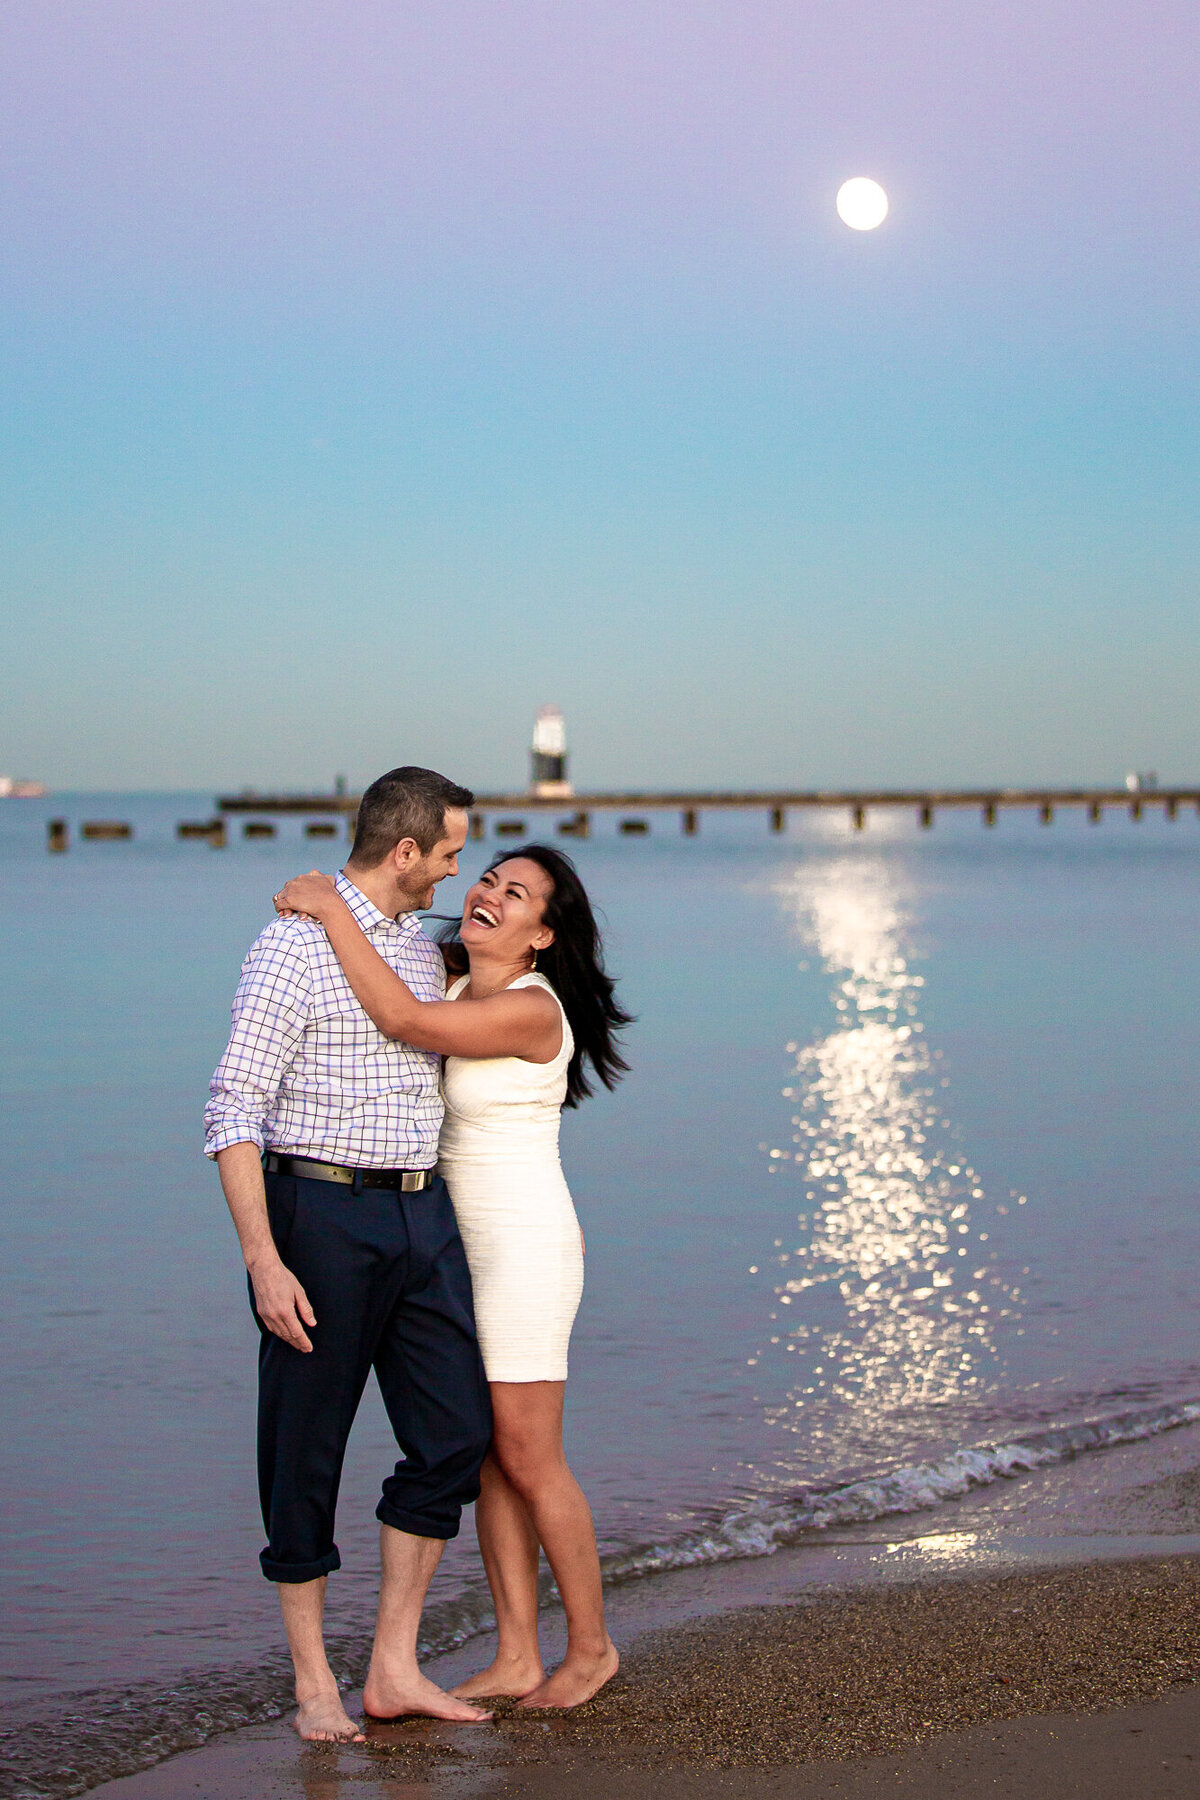 An engaged couple laugh during a sunset engagement photo on a beach in Chicago.